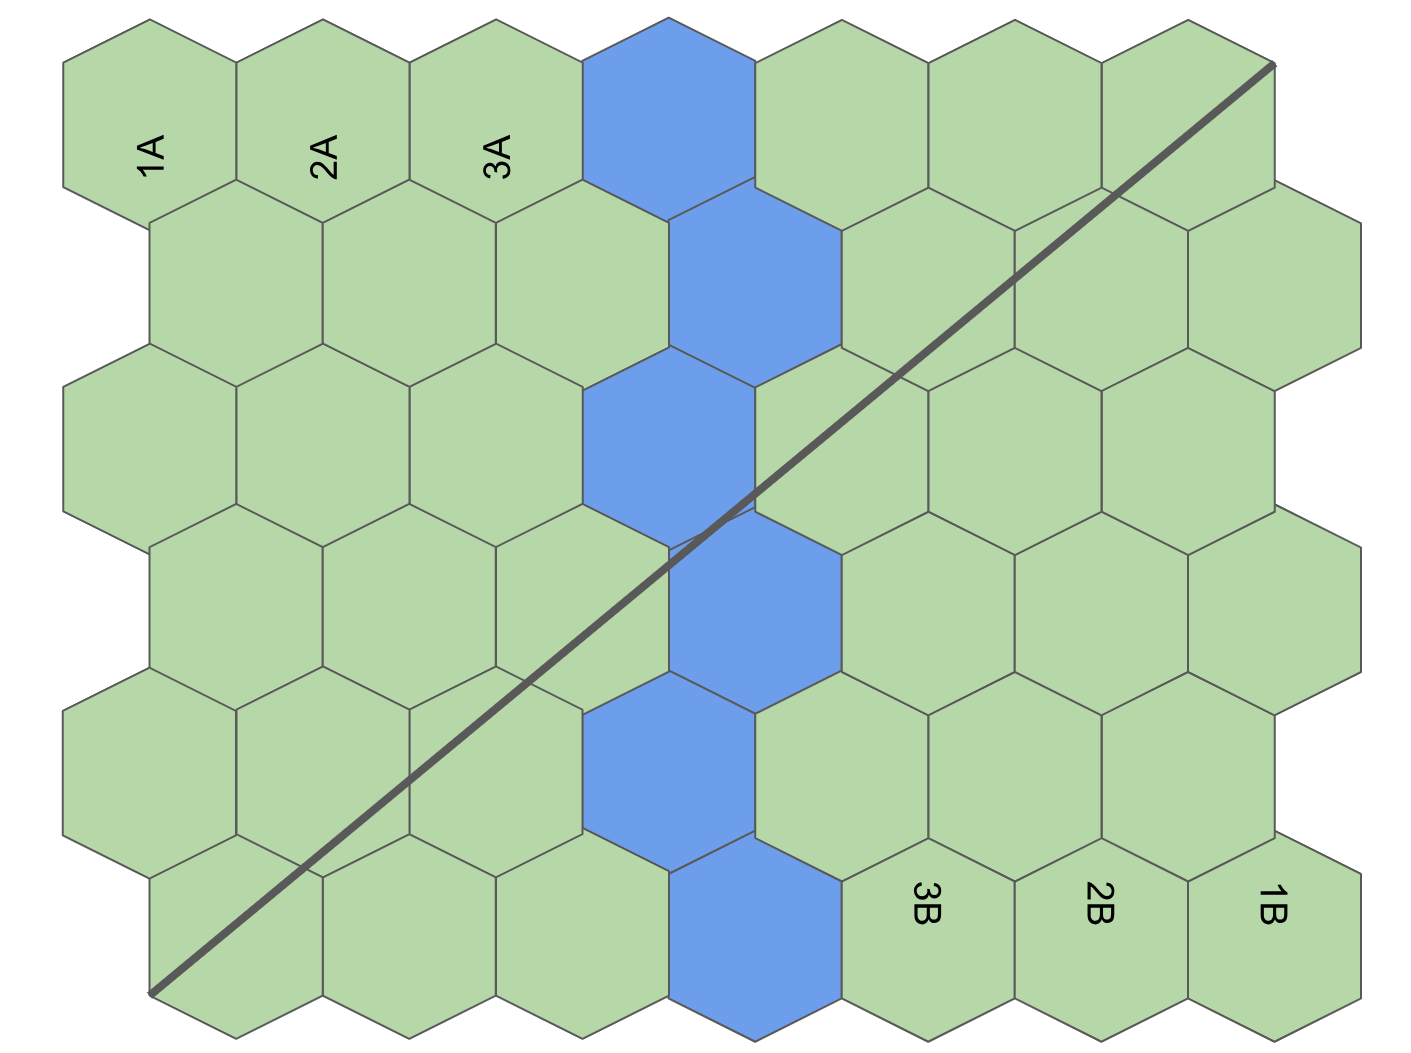 Movement examples and board layouts for squares vs. hexagons.